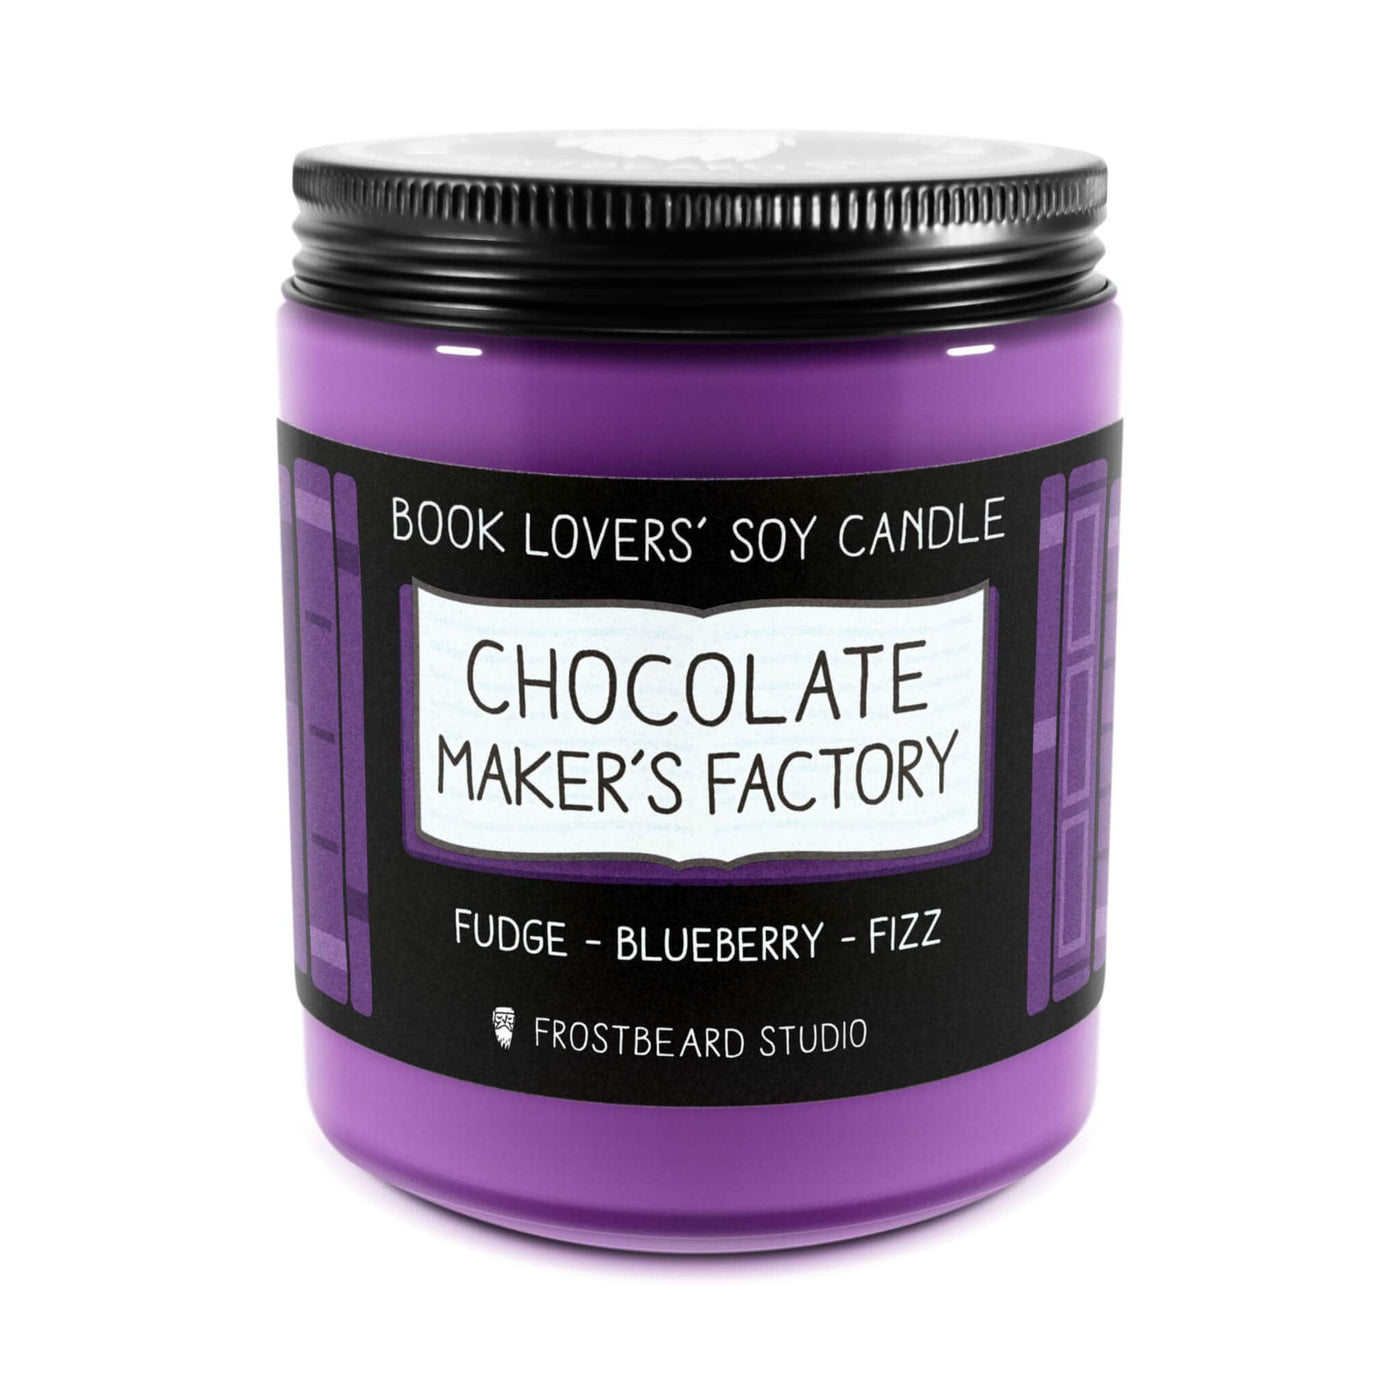 Chocolate Maker's Factory  -  8 oz Jar  -  Book Lovers' Soy Candle  -  Frostbeard Studio